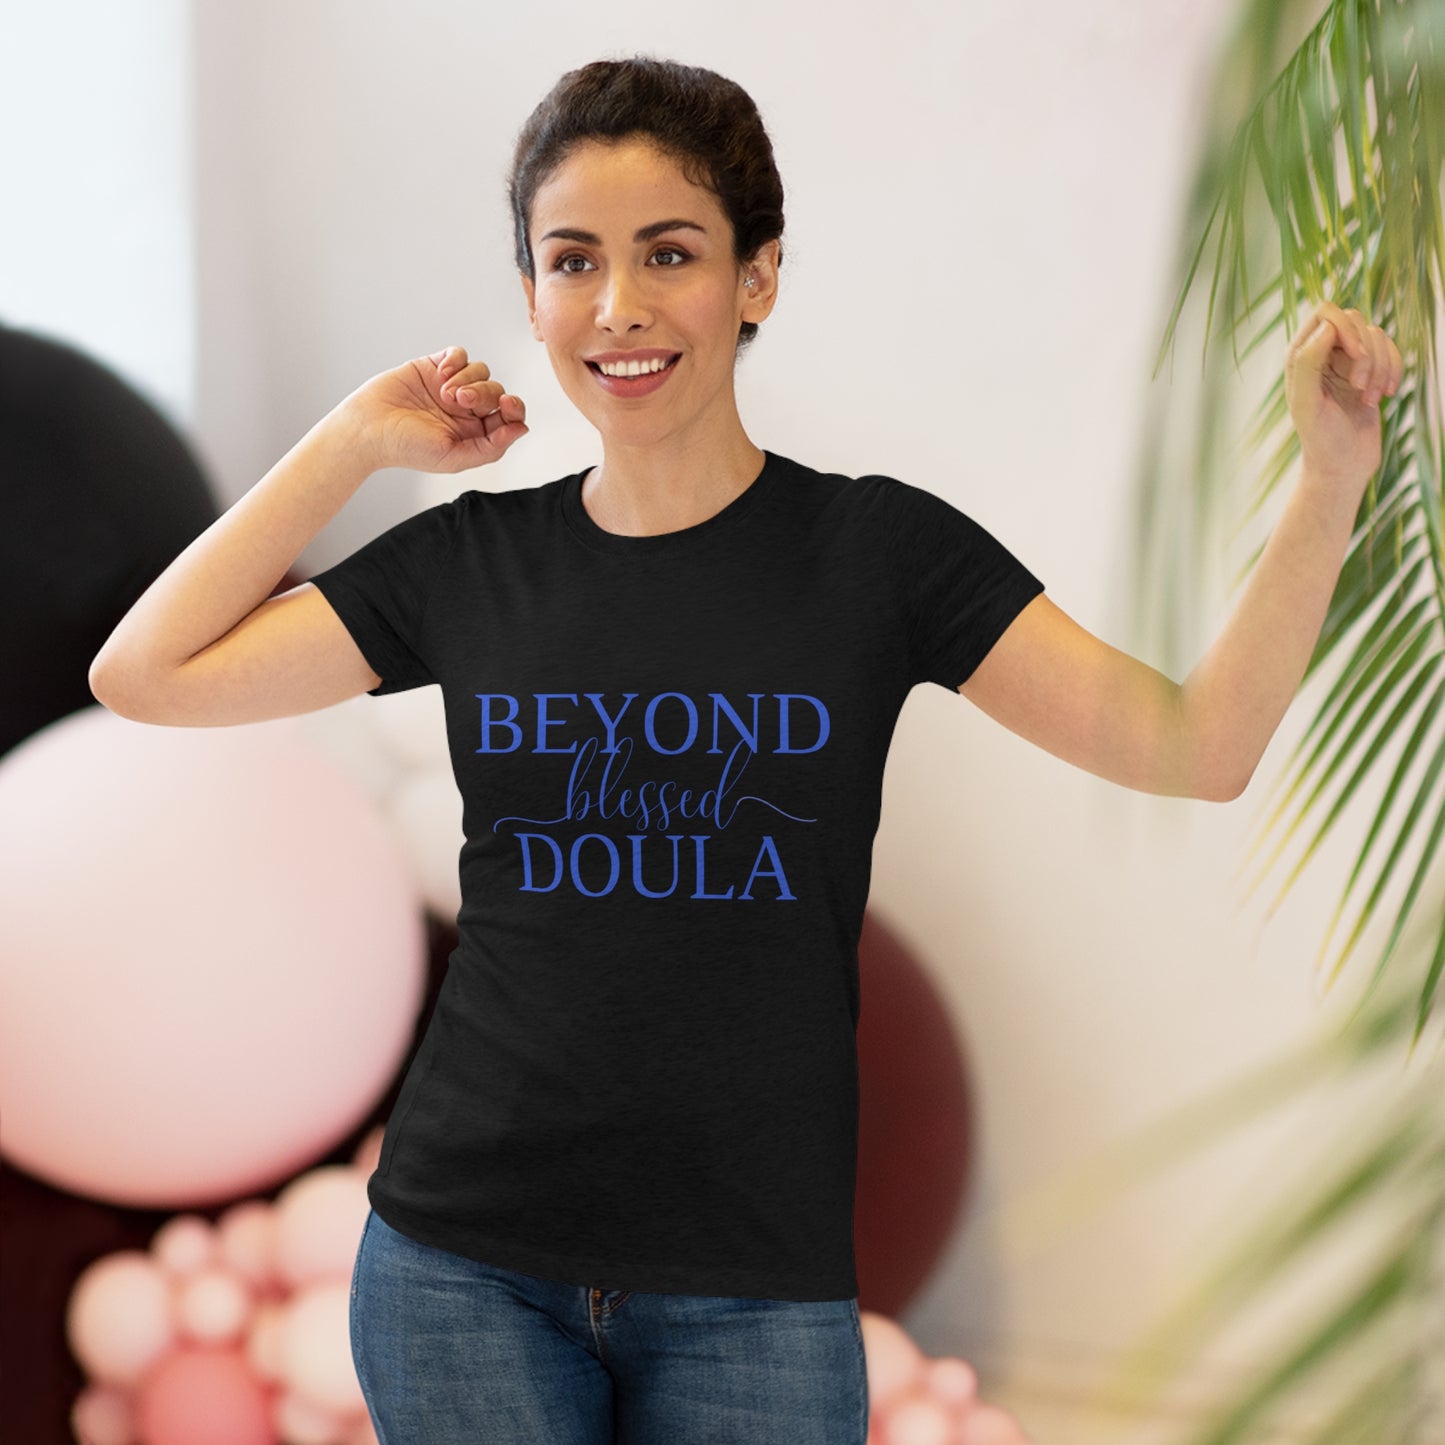 Beyond Blessed Doula - Women's Triblend Tee - Royal Blue